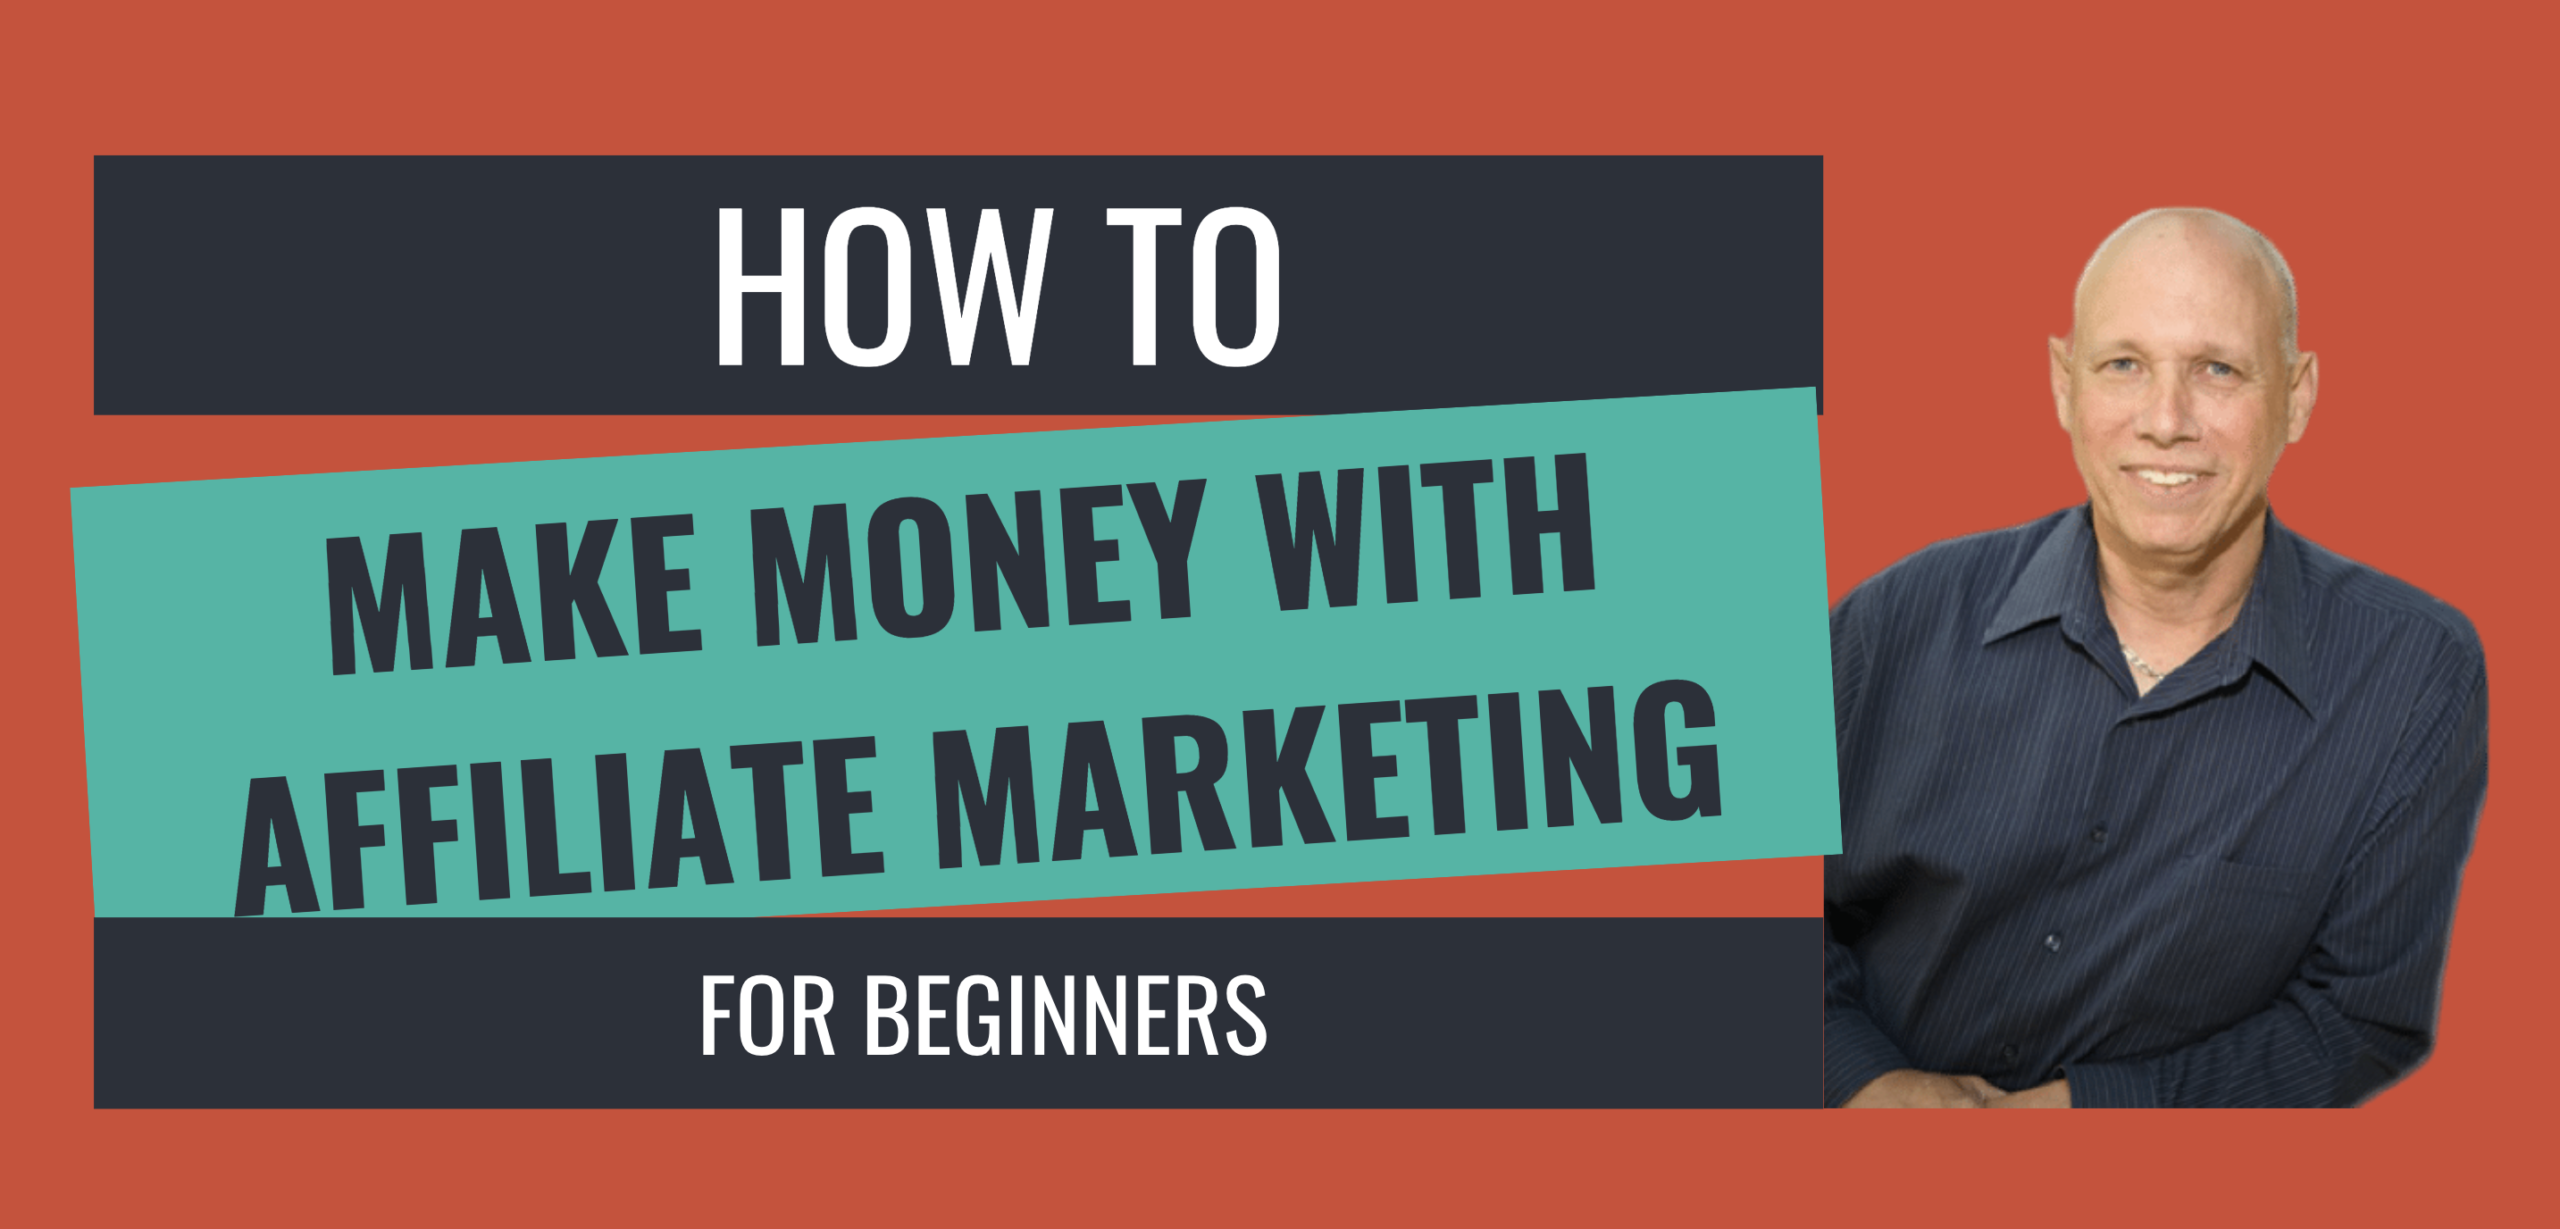 How to Make Money With Affiliate Marketing